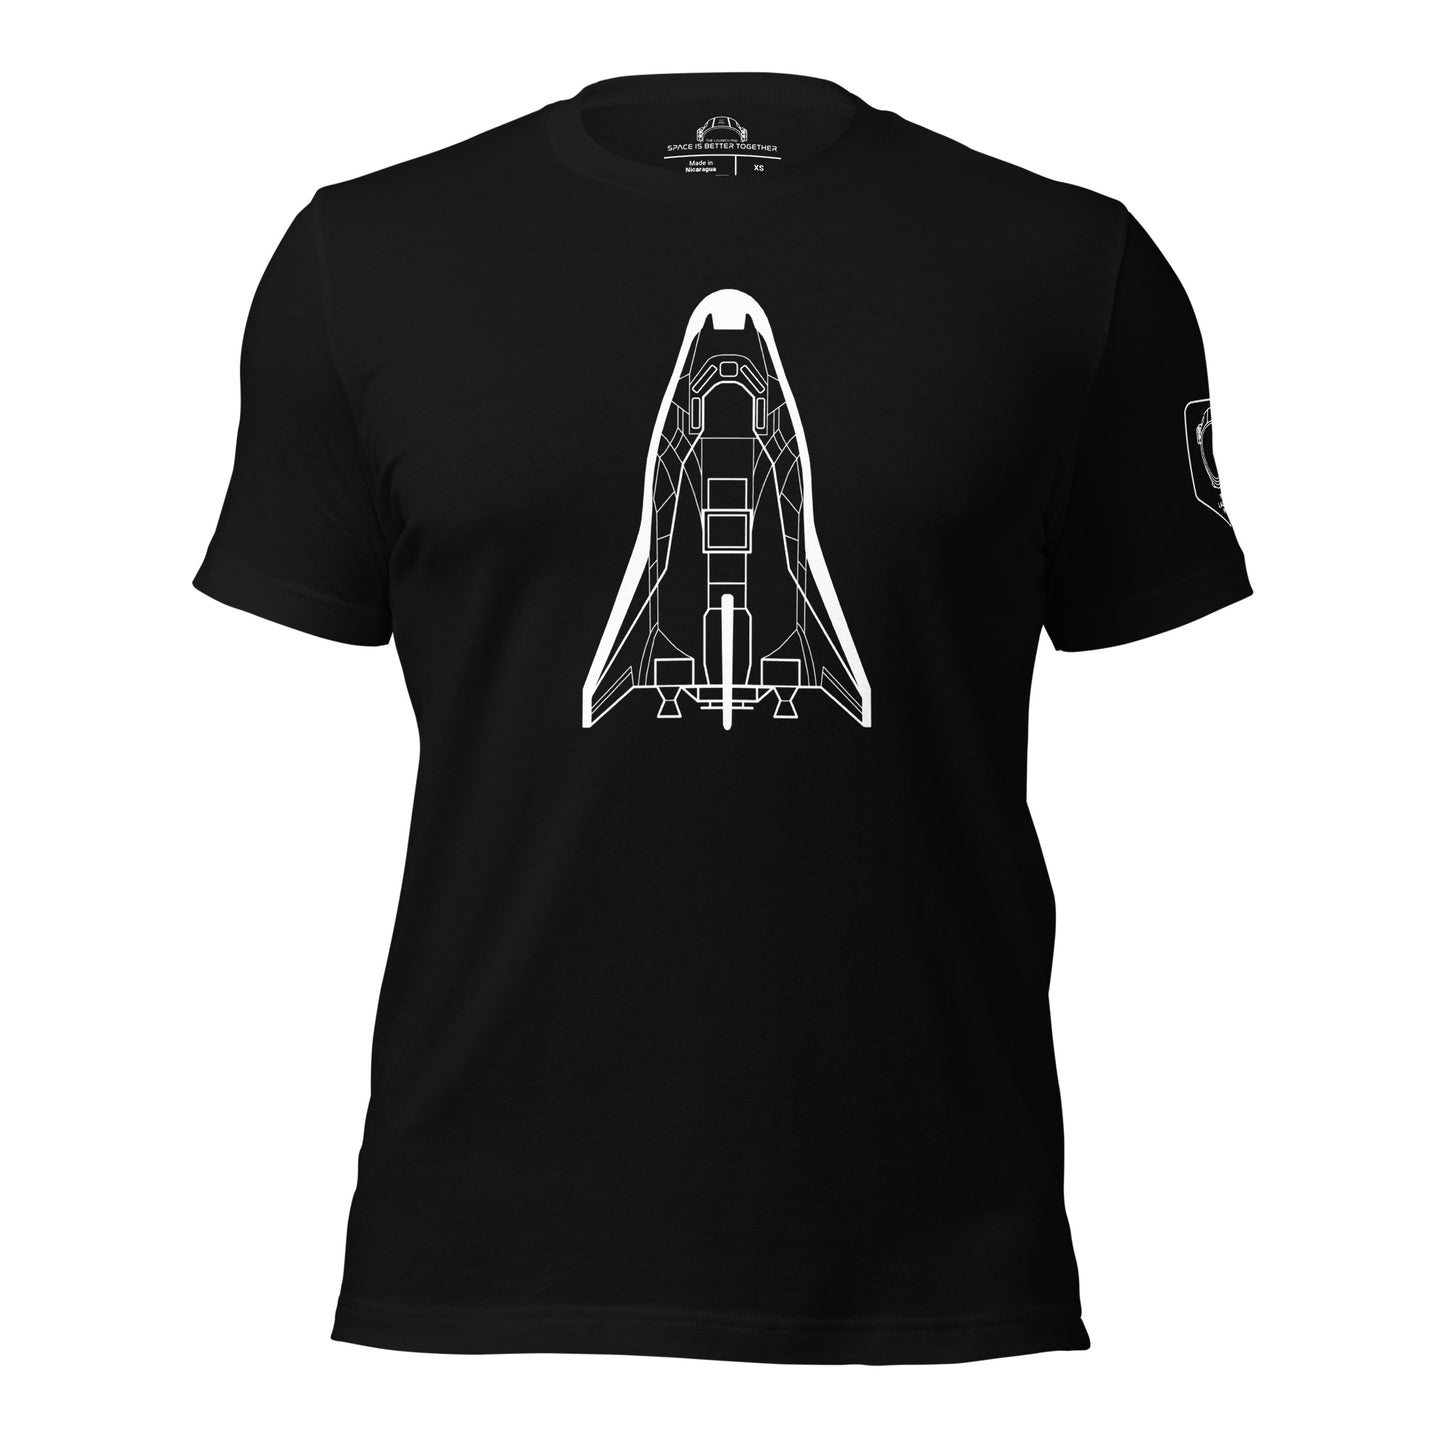 Dream Chaser Tee